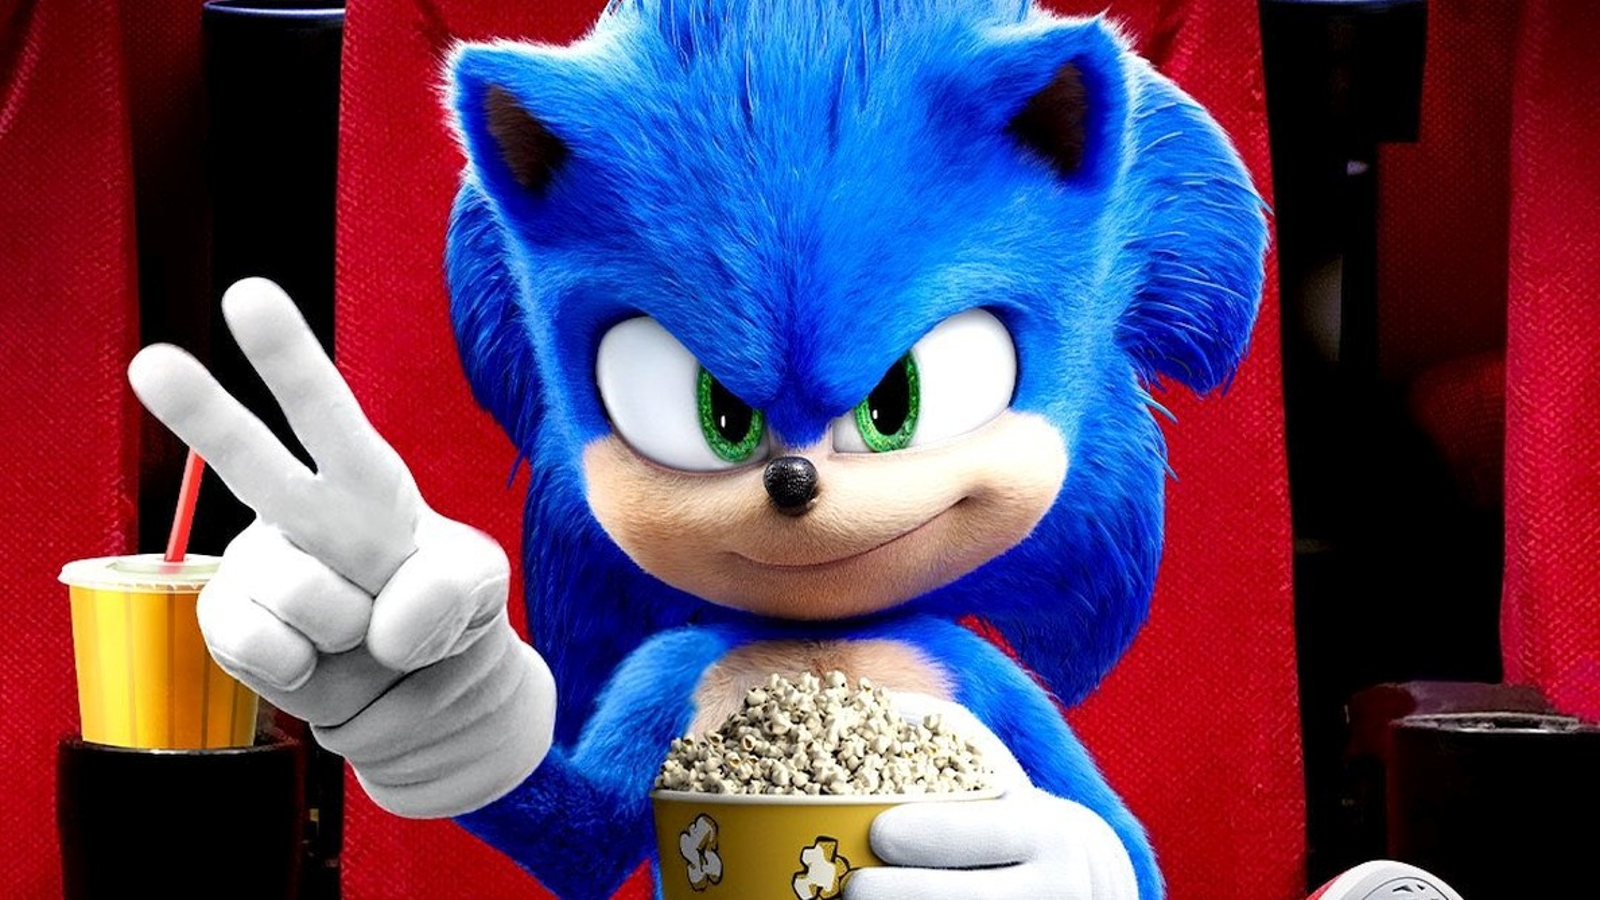 Sonic the Hedgehog 2, Download & Keep now, Official Trailer